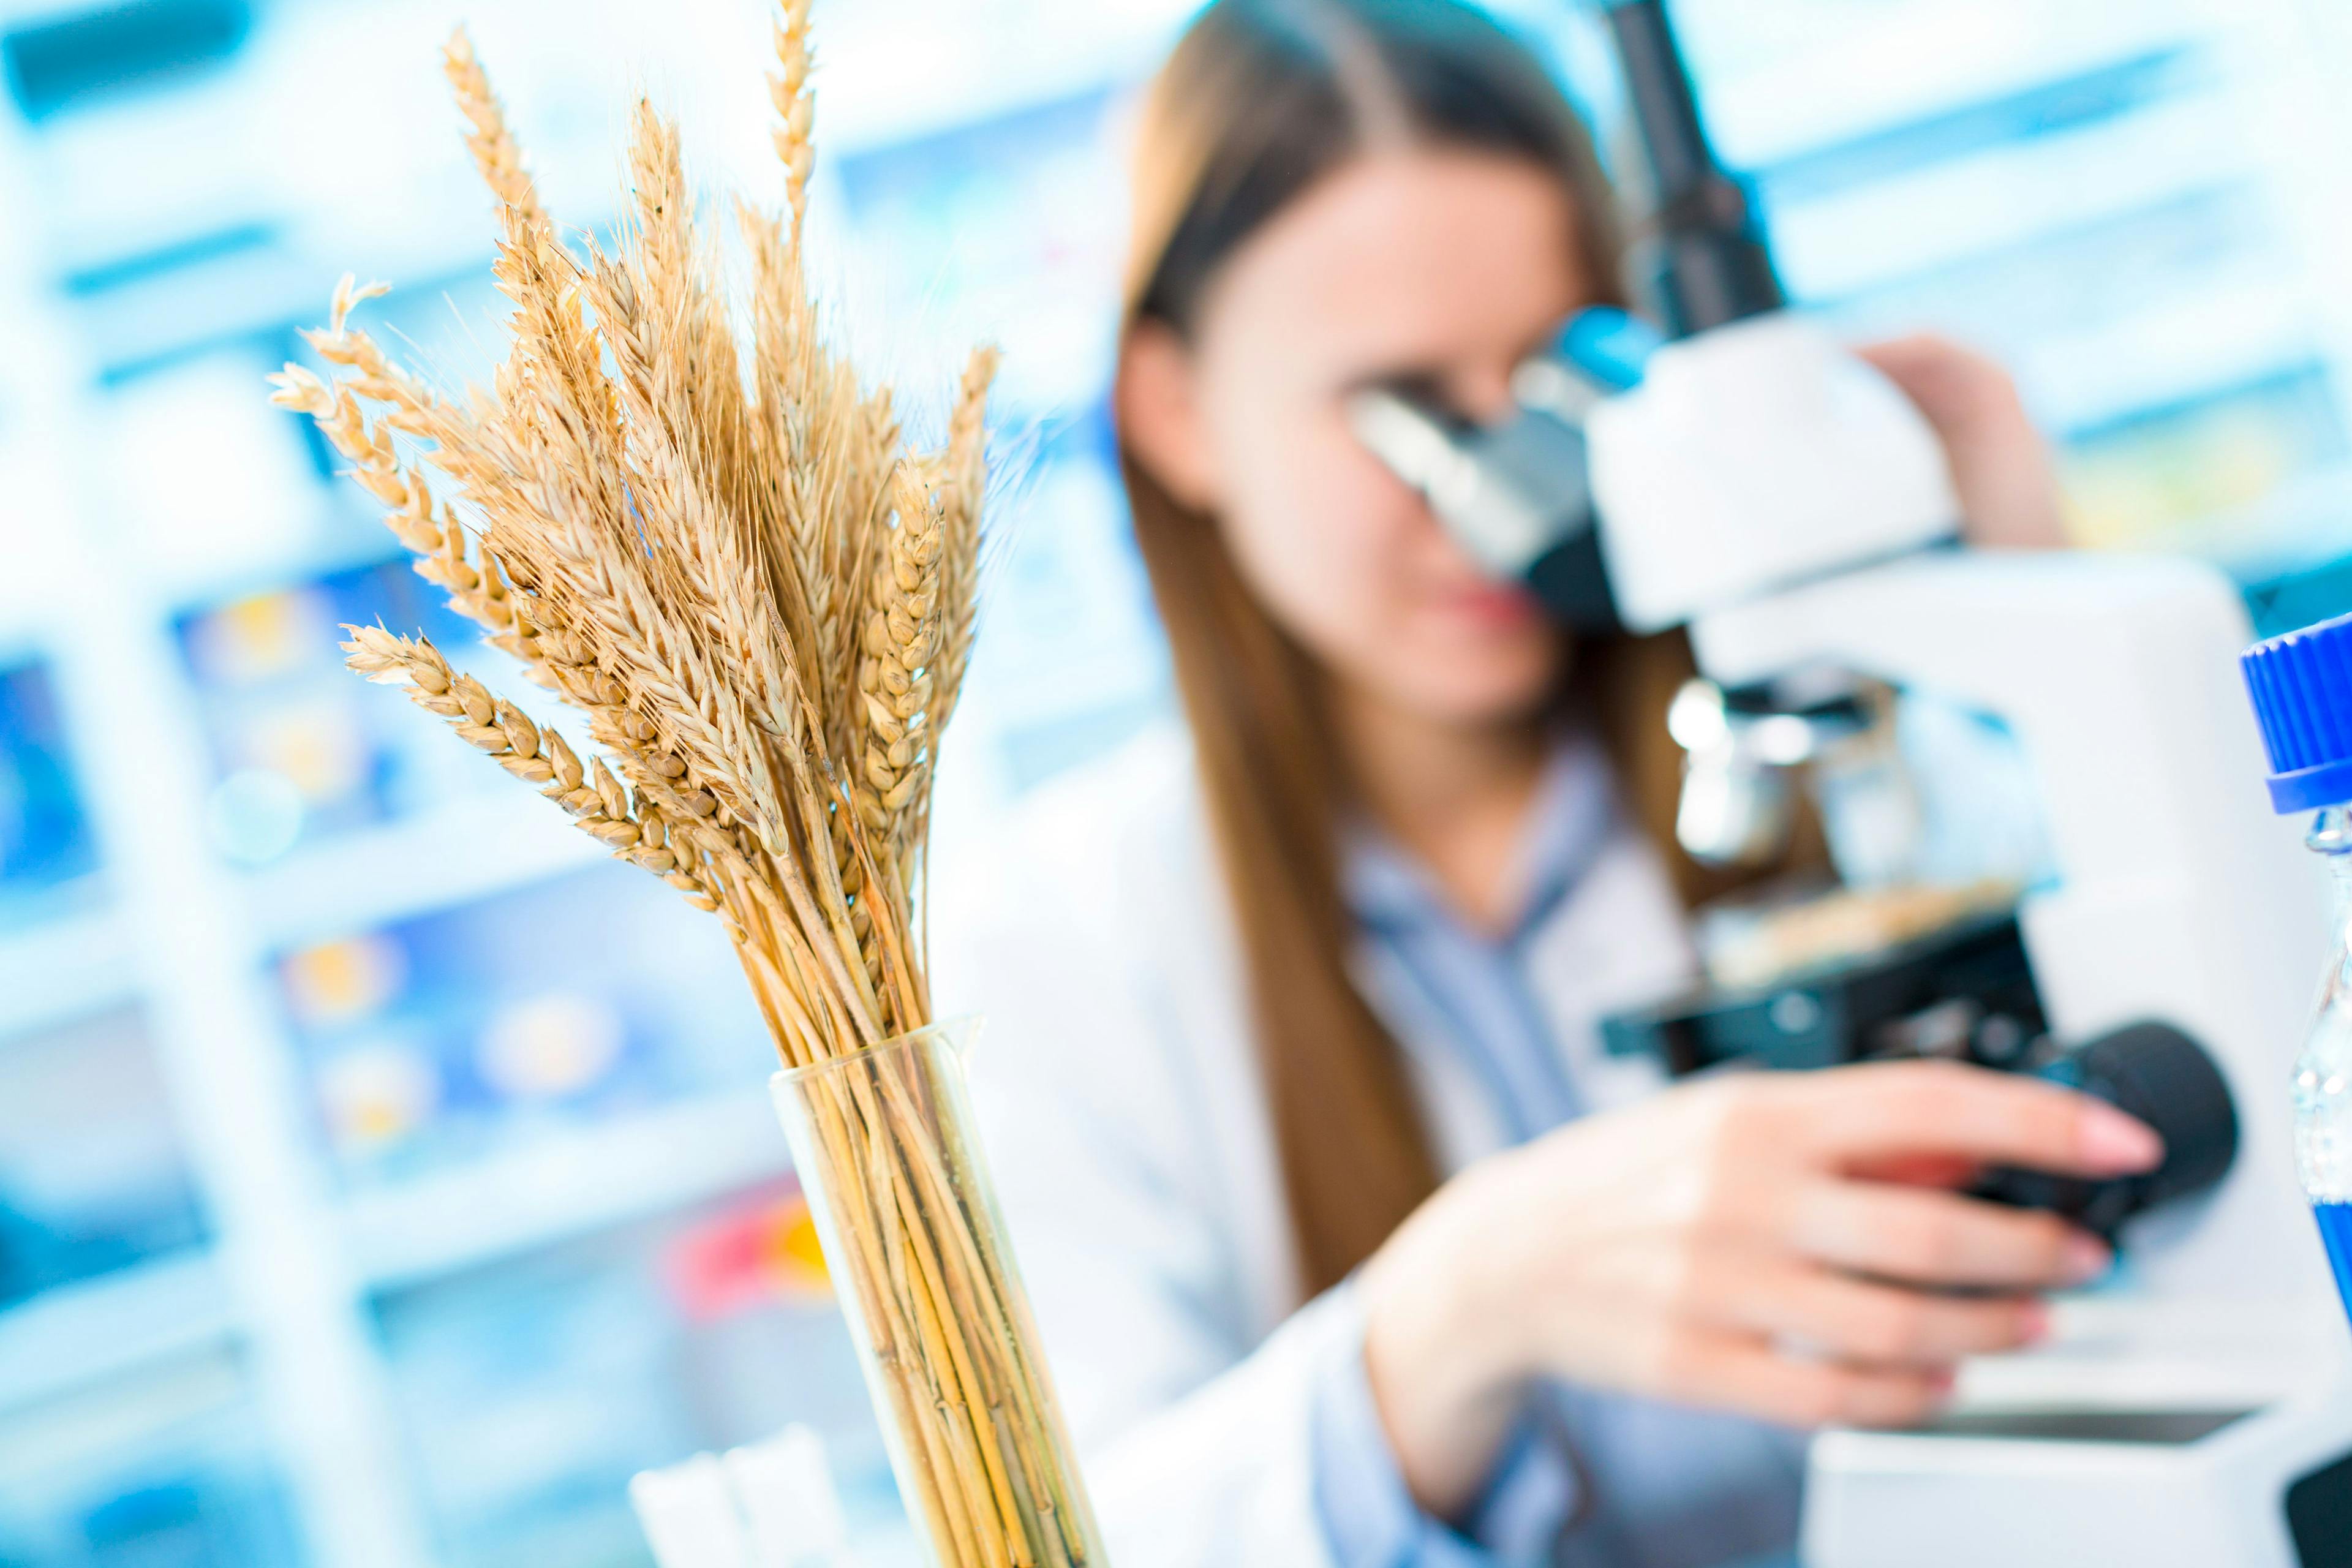 Selective and genetic work with seeds and grains in a scientific laboratory. Food quality control | Image Credit: © luchschenF - stock.adobe.com. 